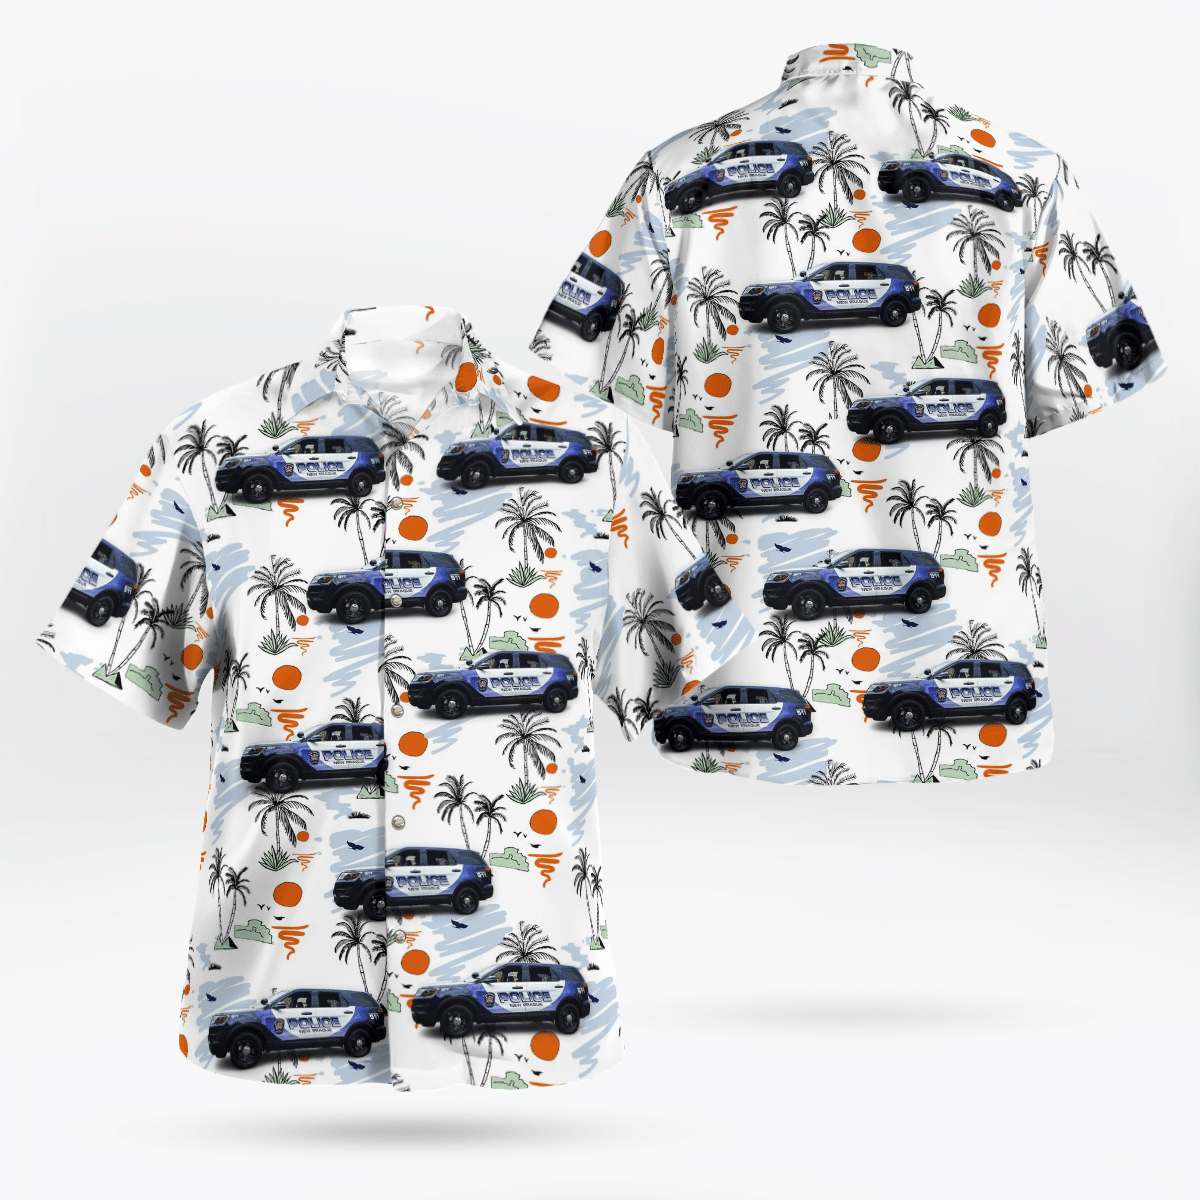 Shop now to find the perfect Hawaii Shirt for your hobby 191